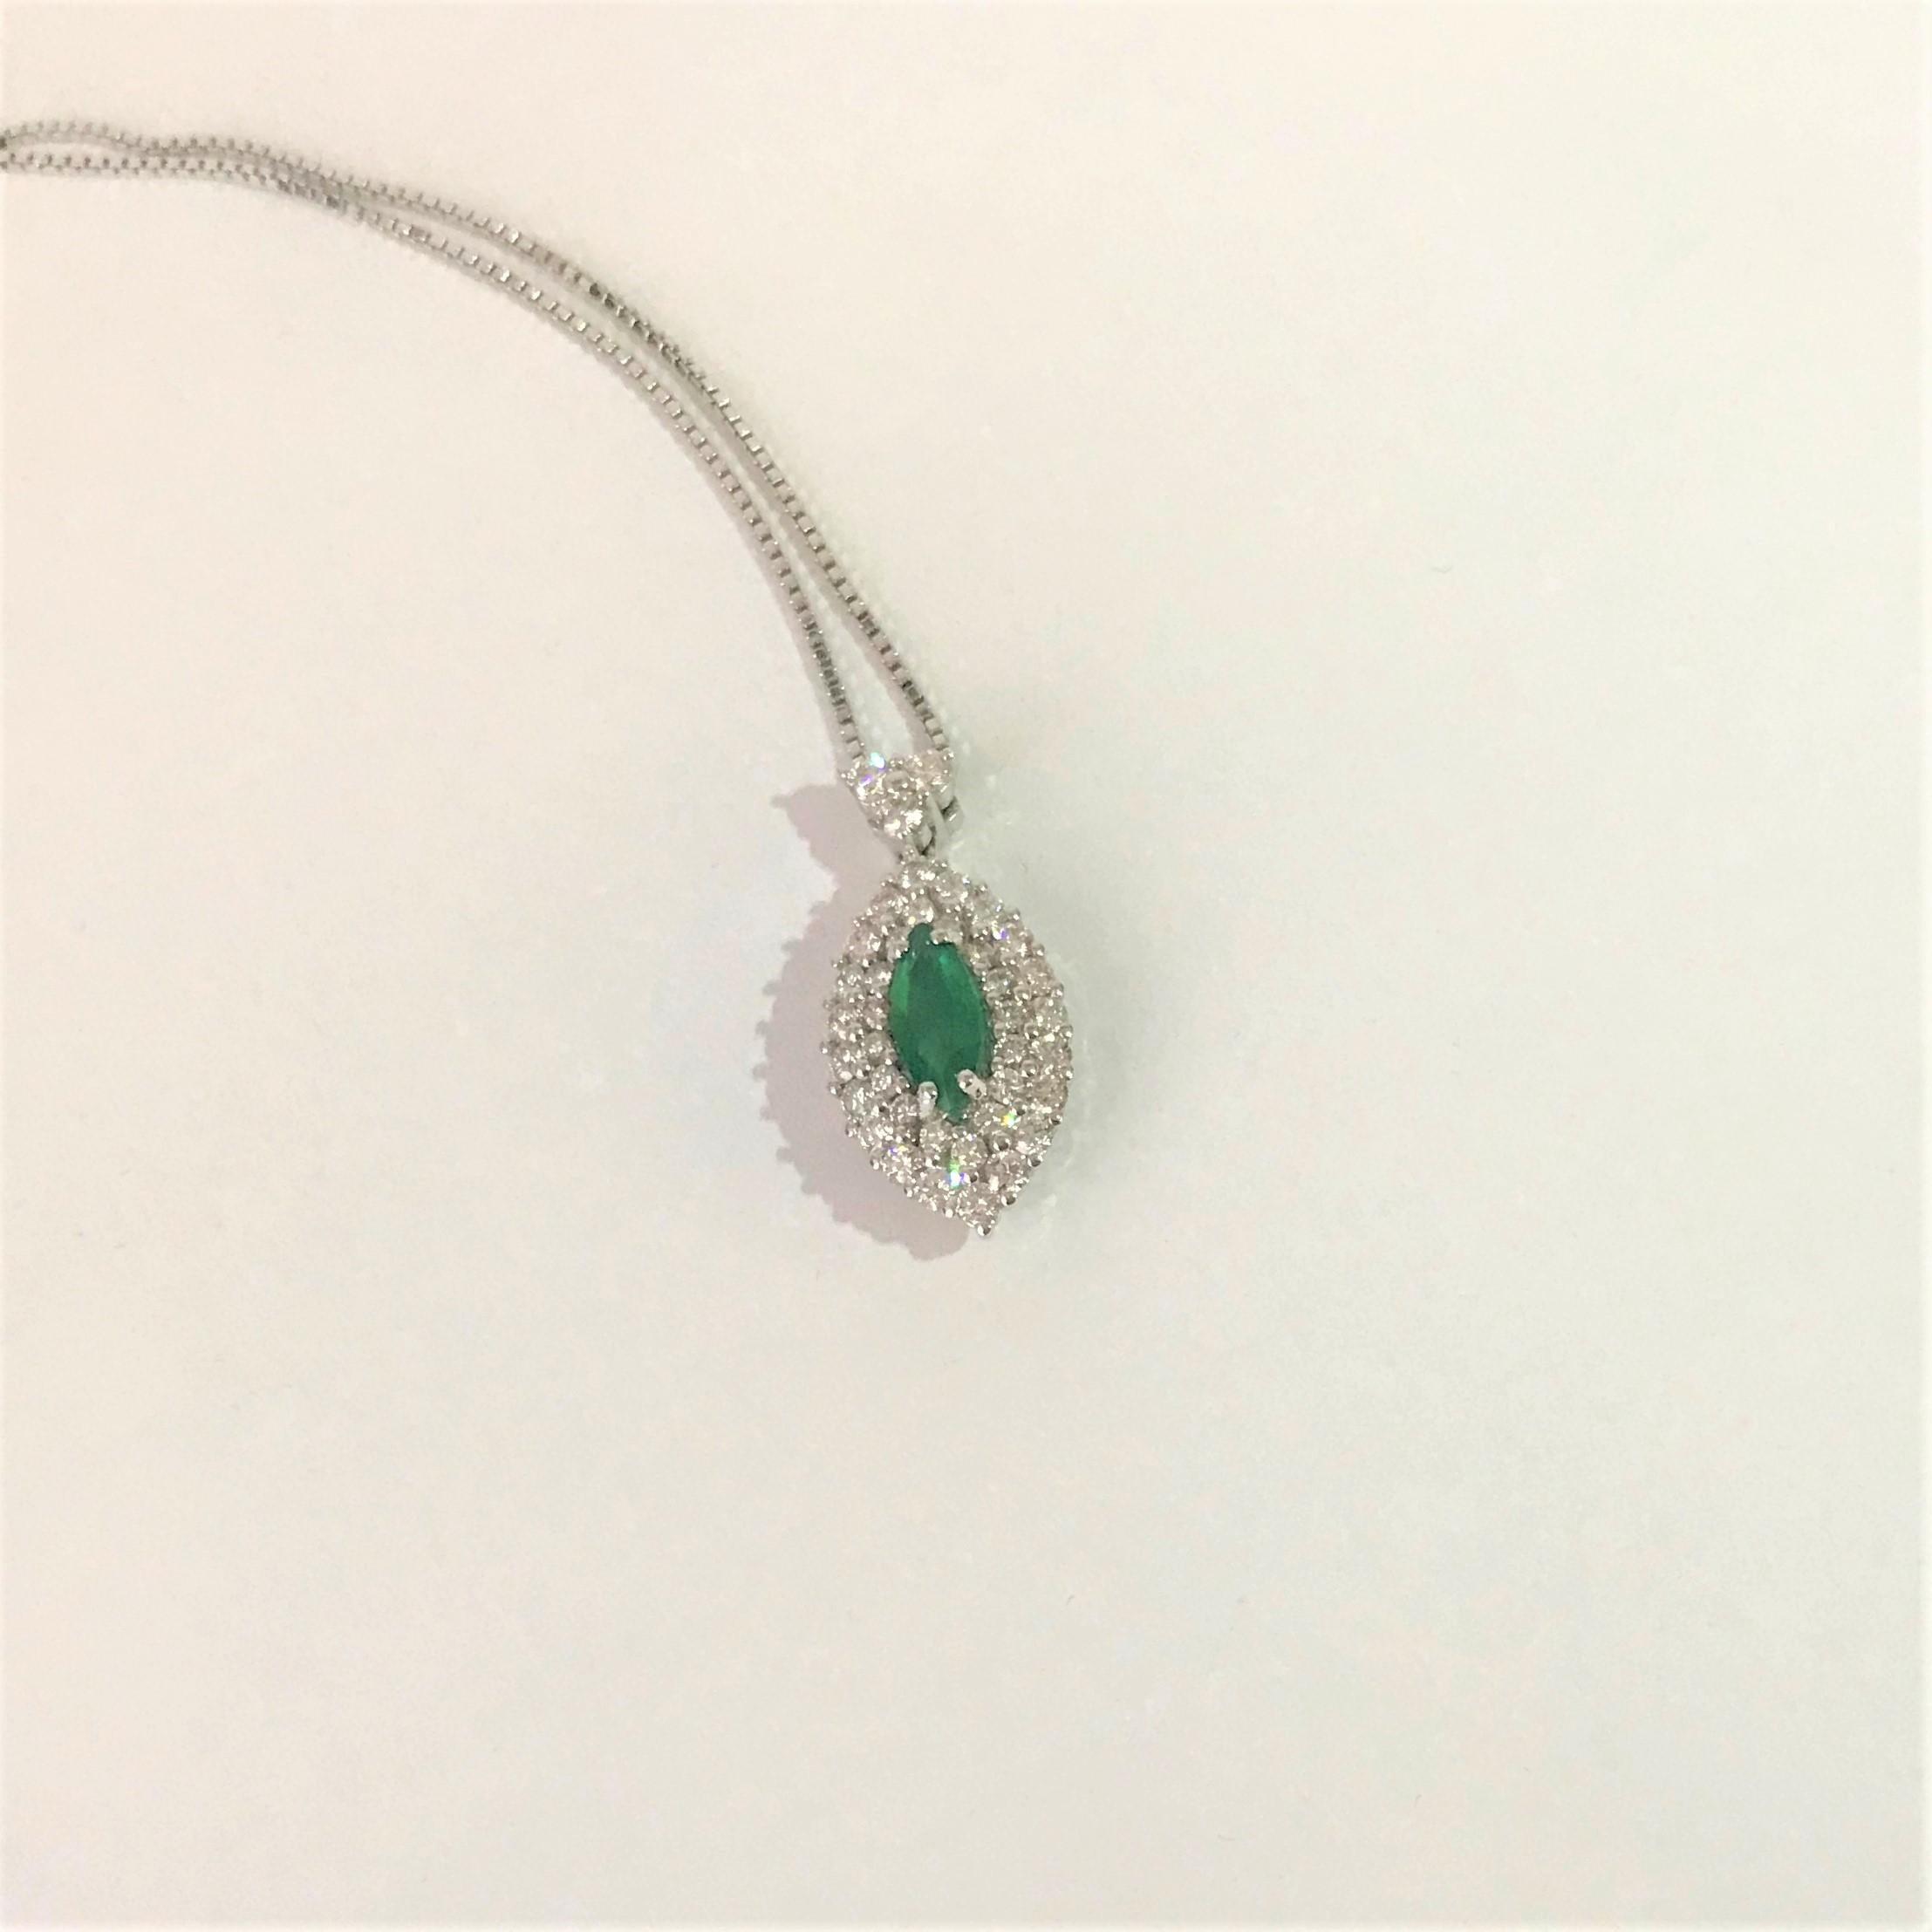 Oval shape pendant with a central  0.61 carat  Emerald, and  1.11 carat Round brilliant cut Diamonds.
The necklace is 18 k white gold.
Chain is 42 cm long. 
The high quality of this jewel is the expression of the skilful work of our goldsmiths
All